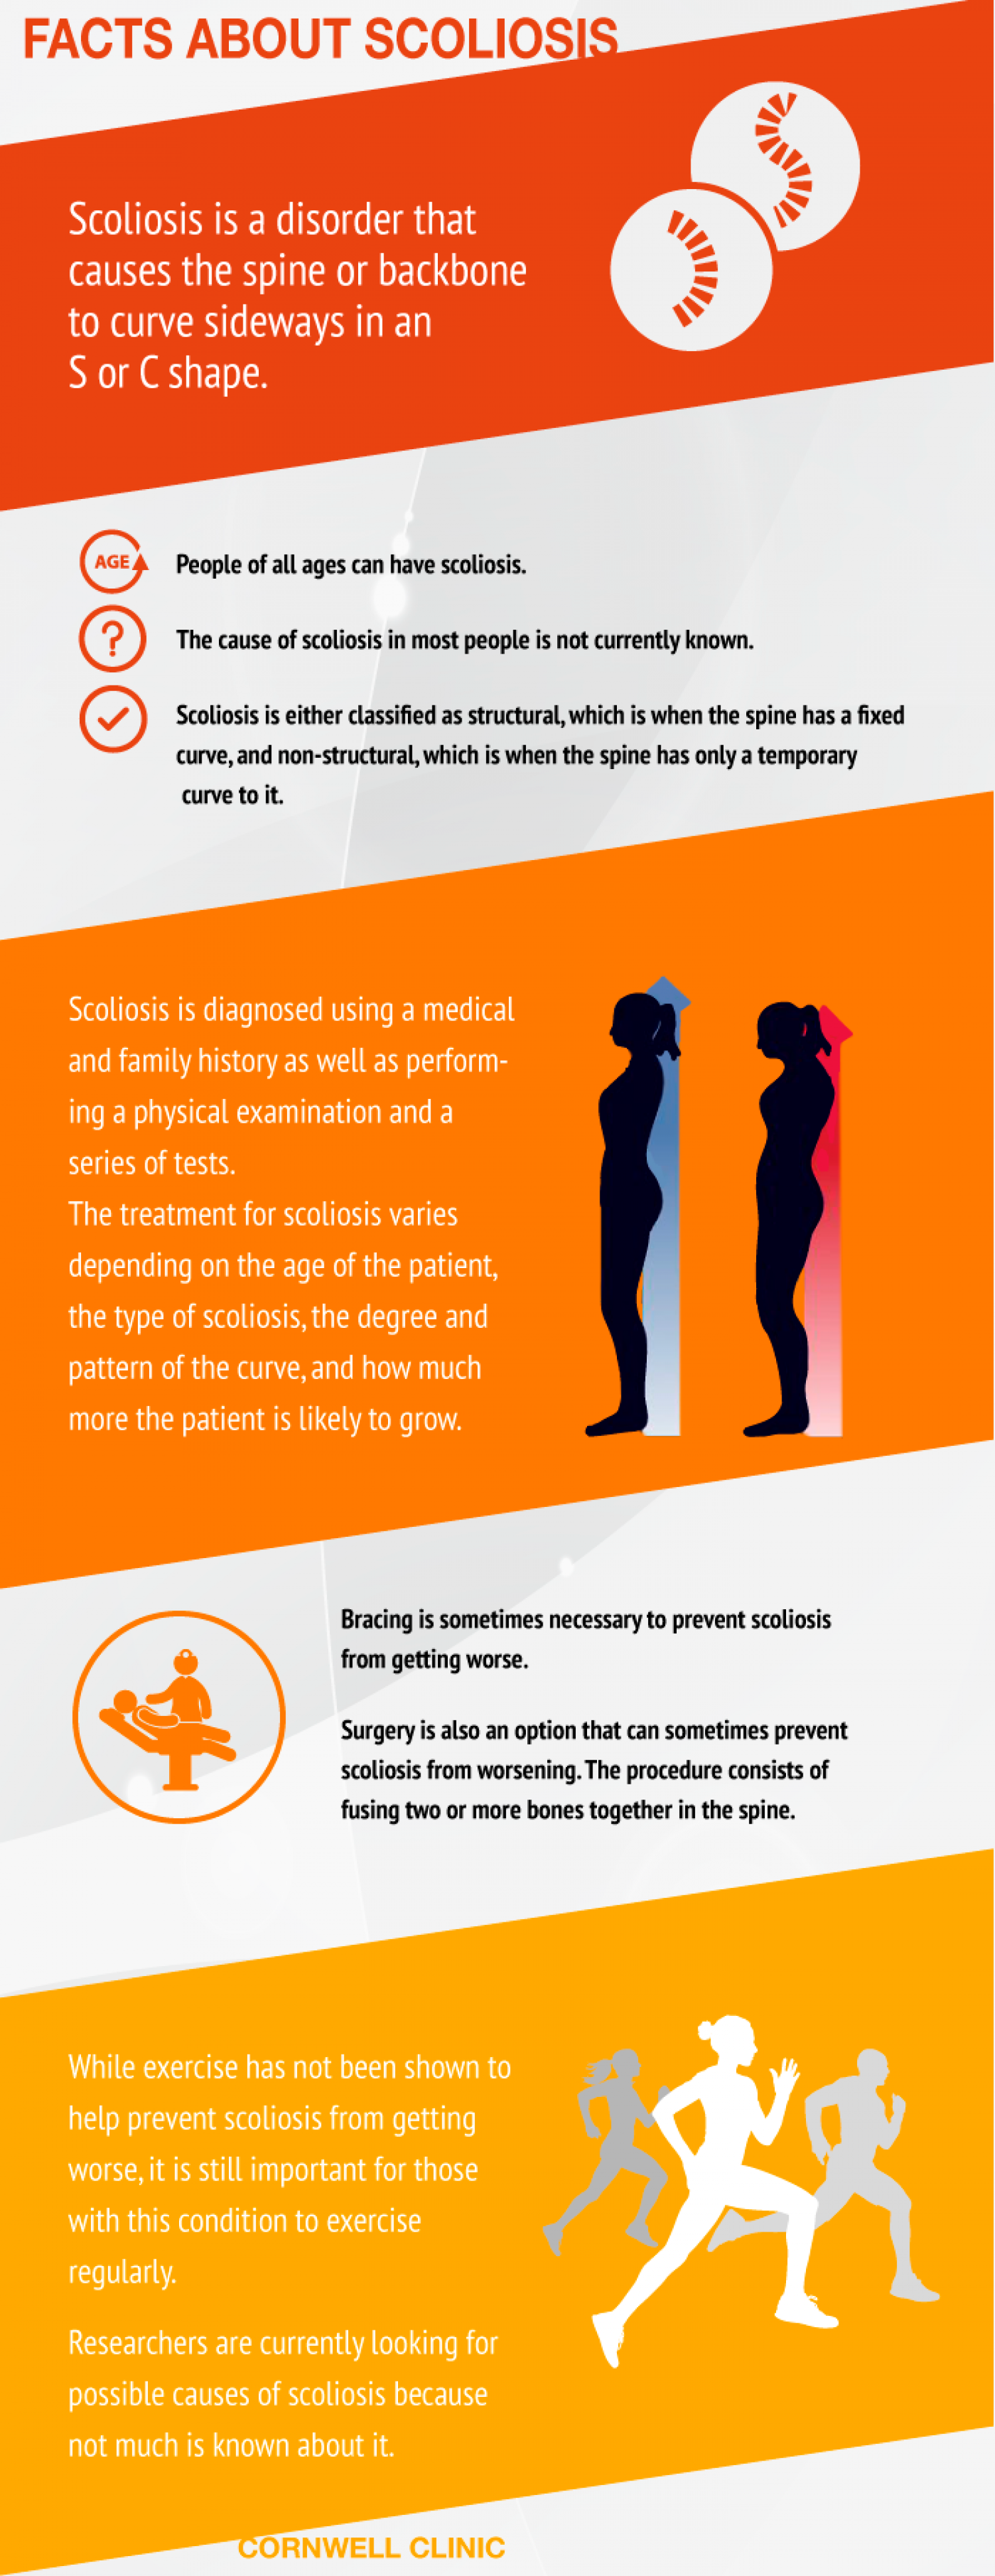 Facts About Scoliosis: Infographic